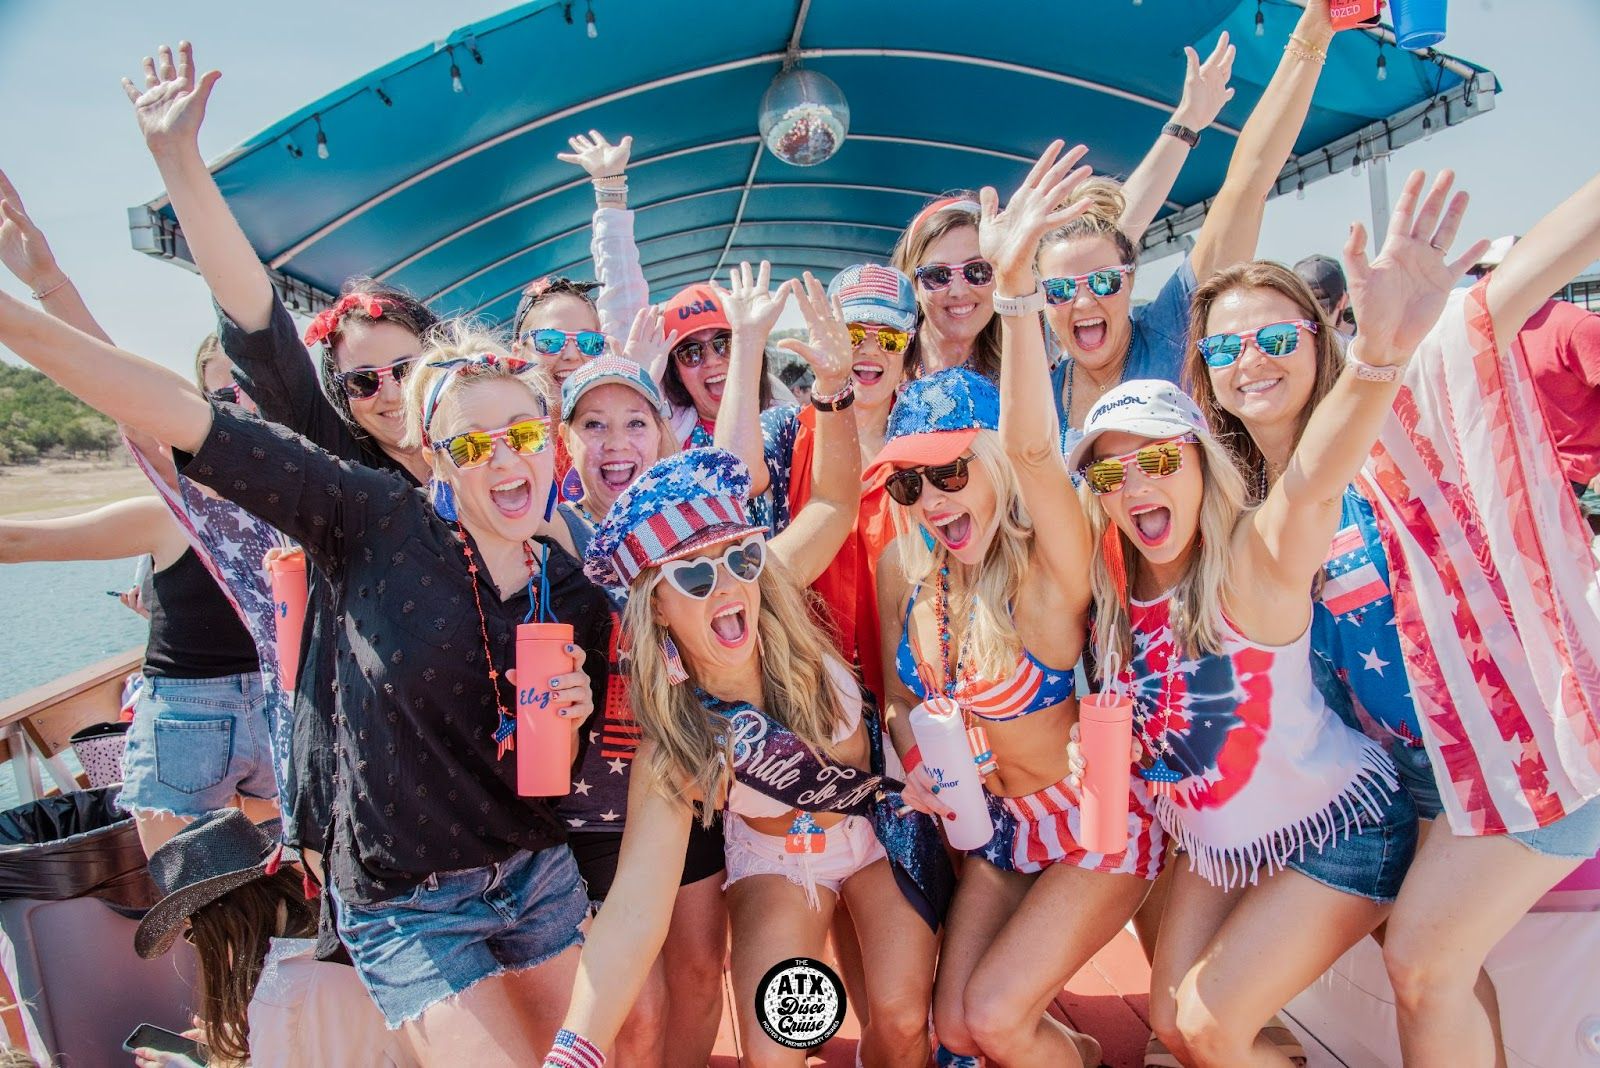 Matching outfits for Bride and the bride squad at a bachelorette party in Austin by Premier Party Cruises